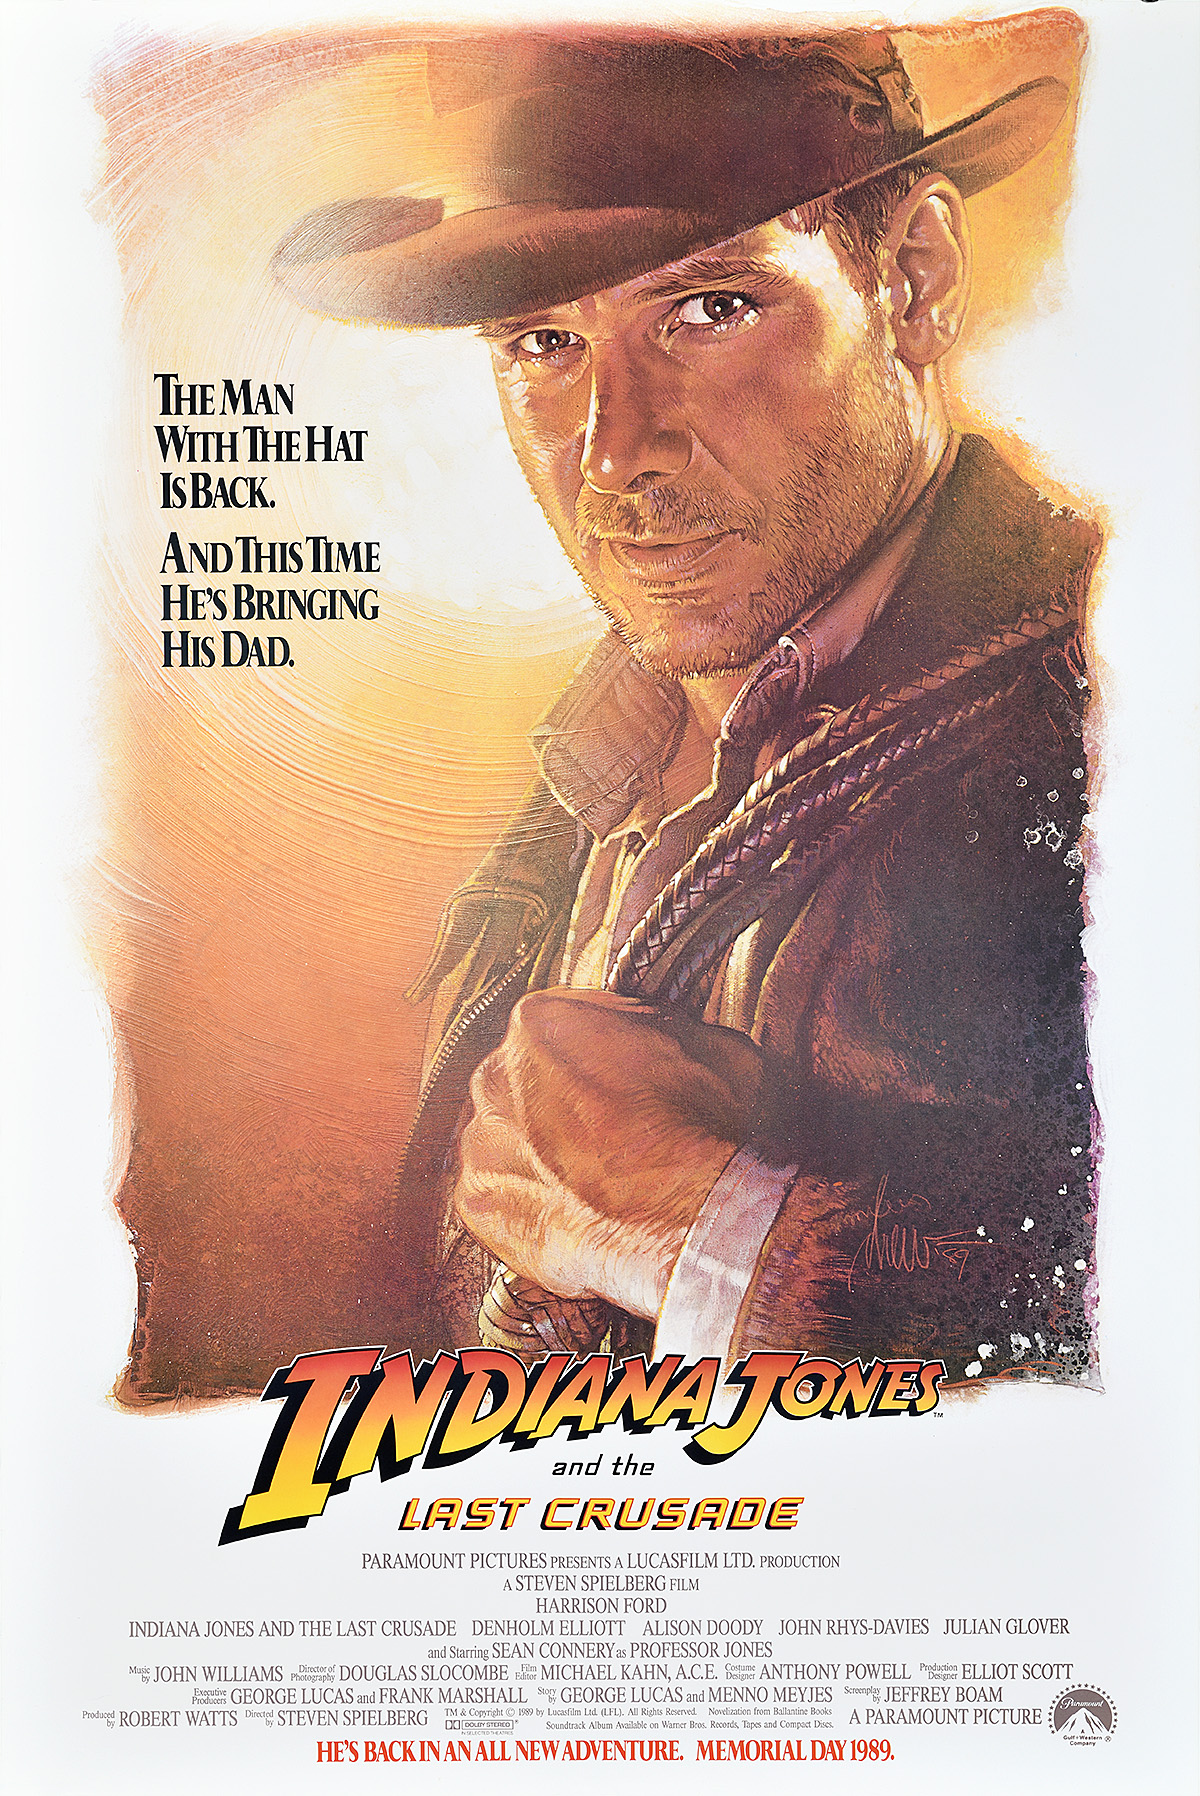 A poster of a man looking earnestly at the viewer wearing a cowboy hat and holding a whip.